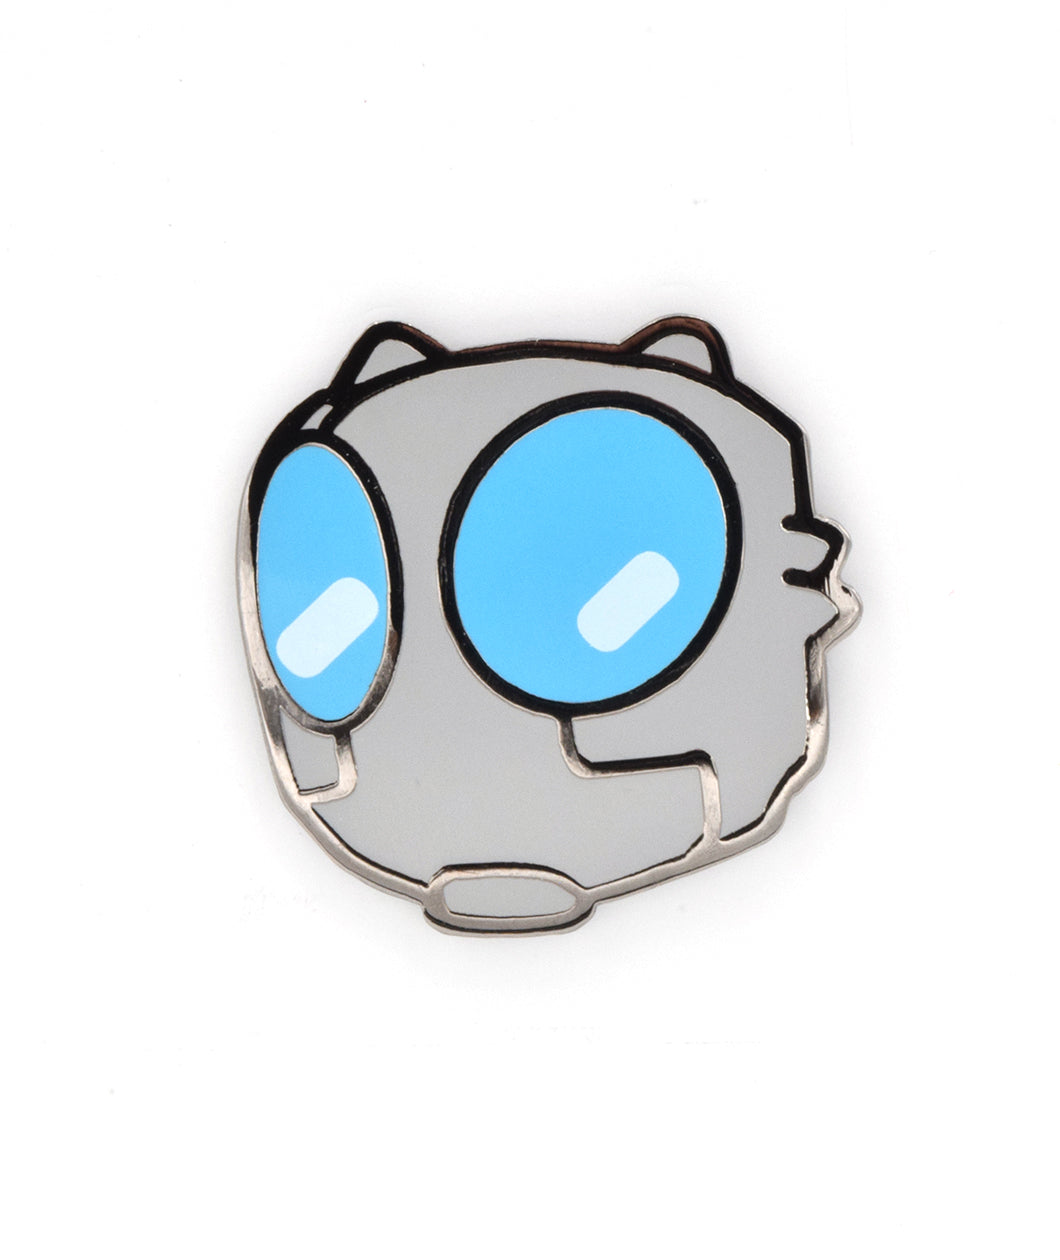 A gray robot hear with a silver outline. Robot head has two big light blue eyes with silver outline and white highlights - from Tesladyne